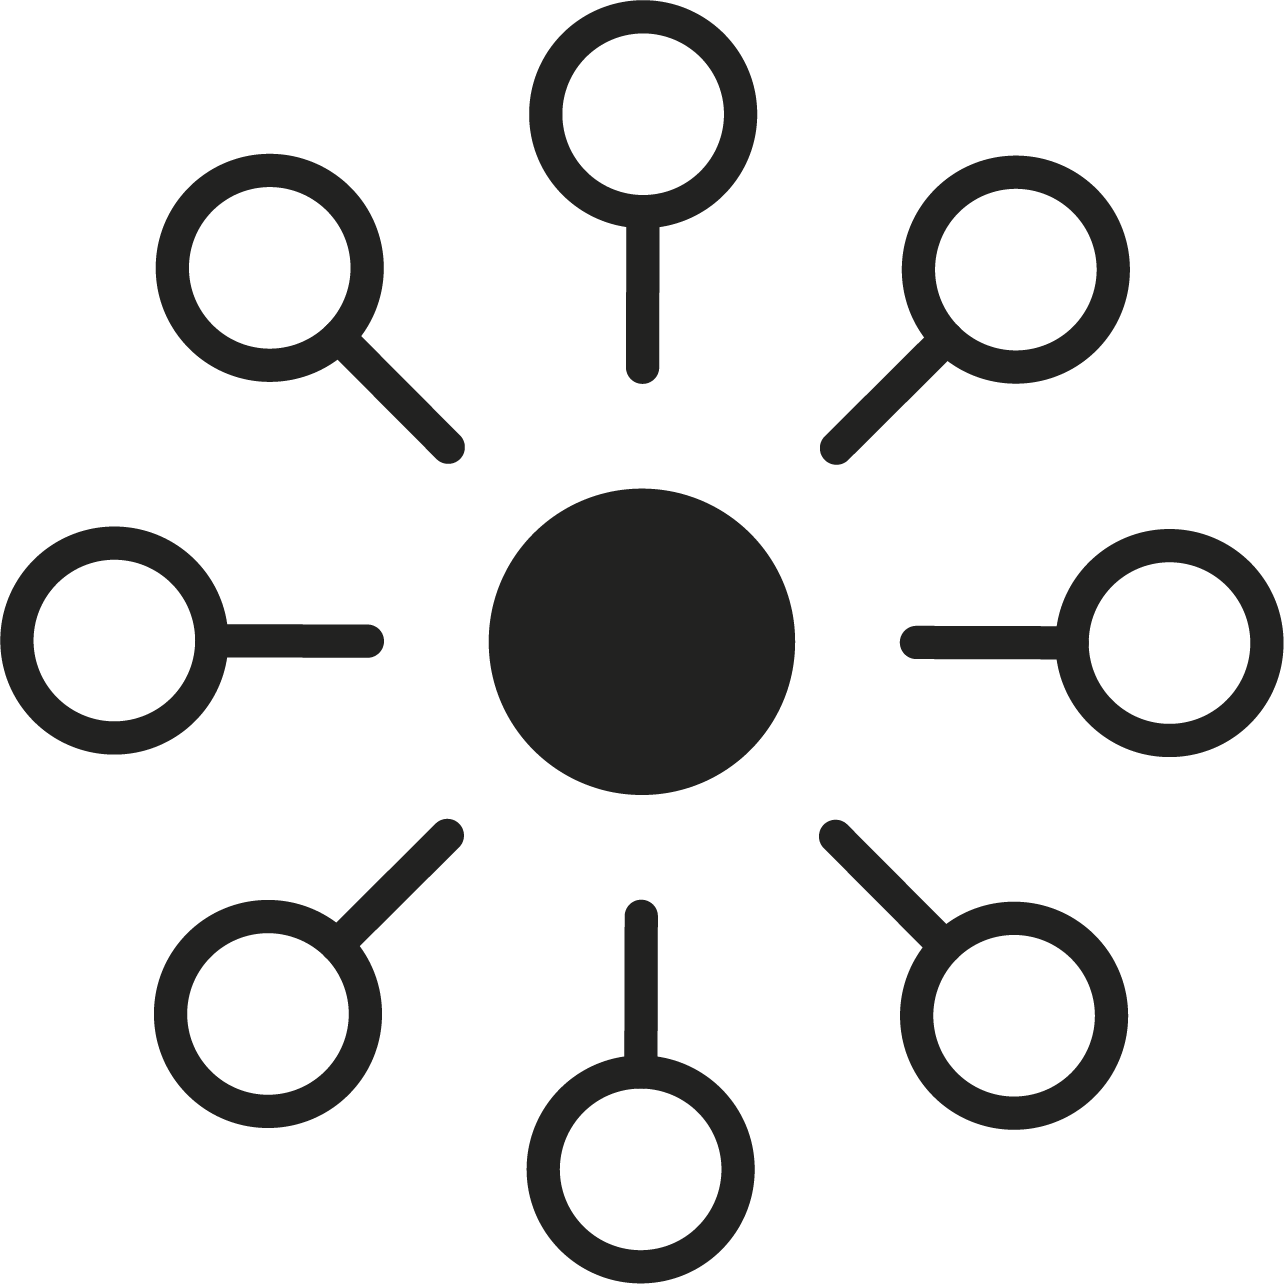 Icon of several dots